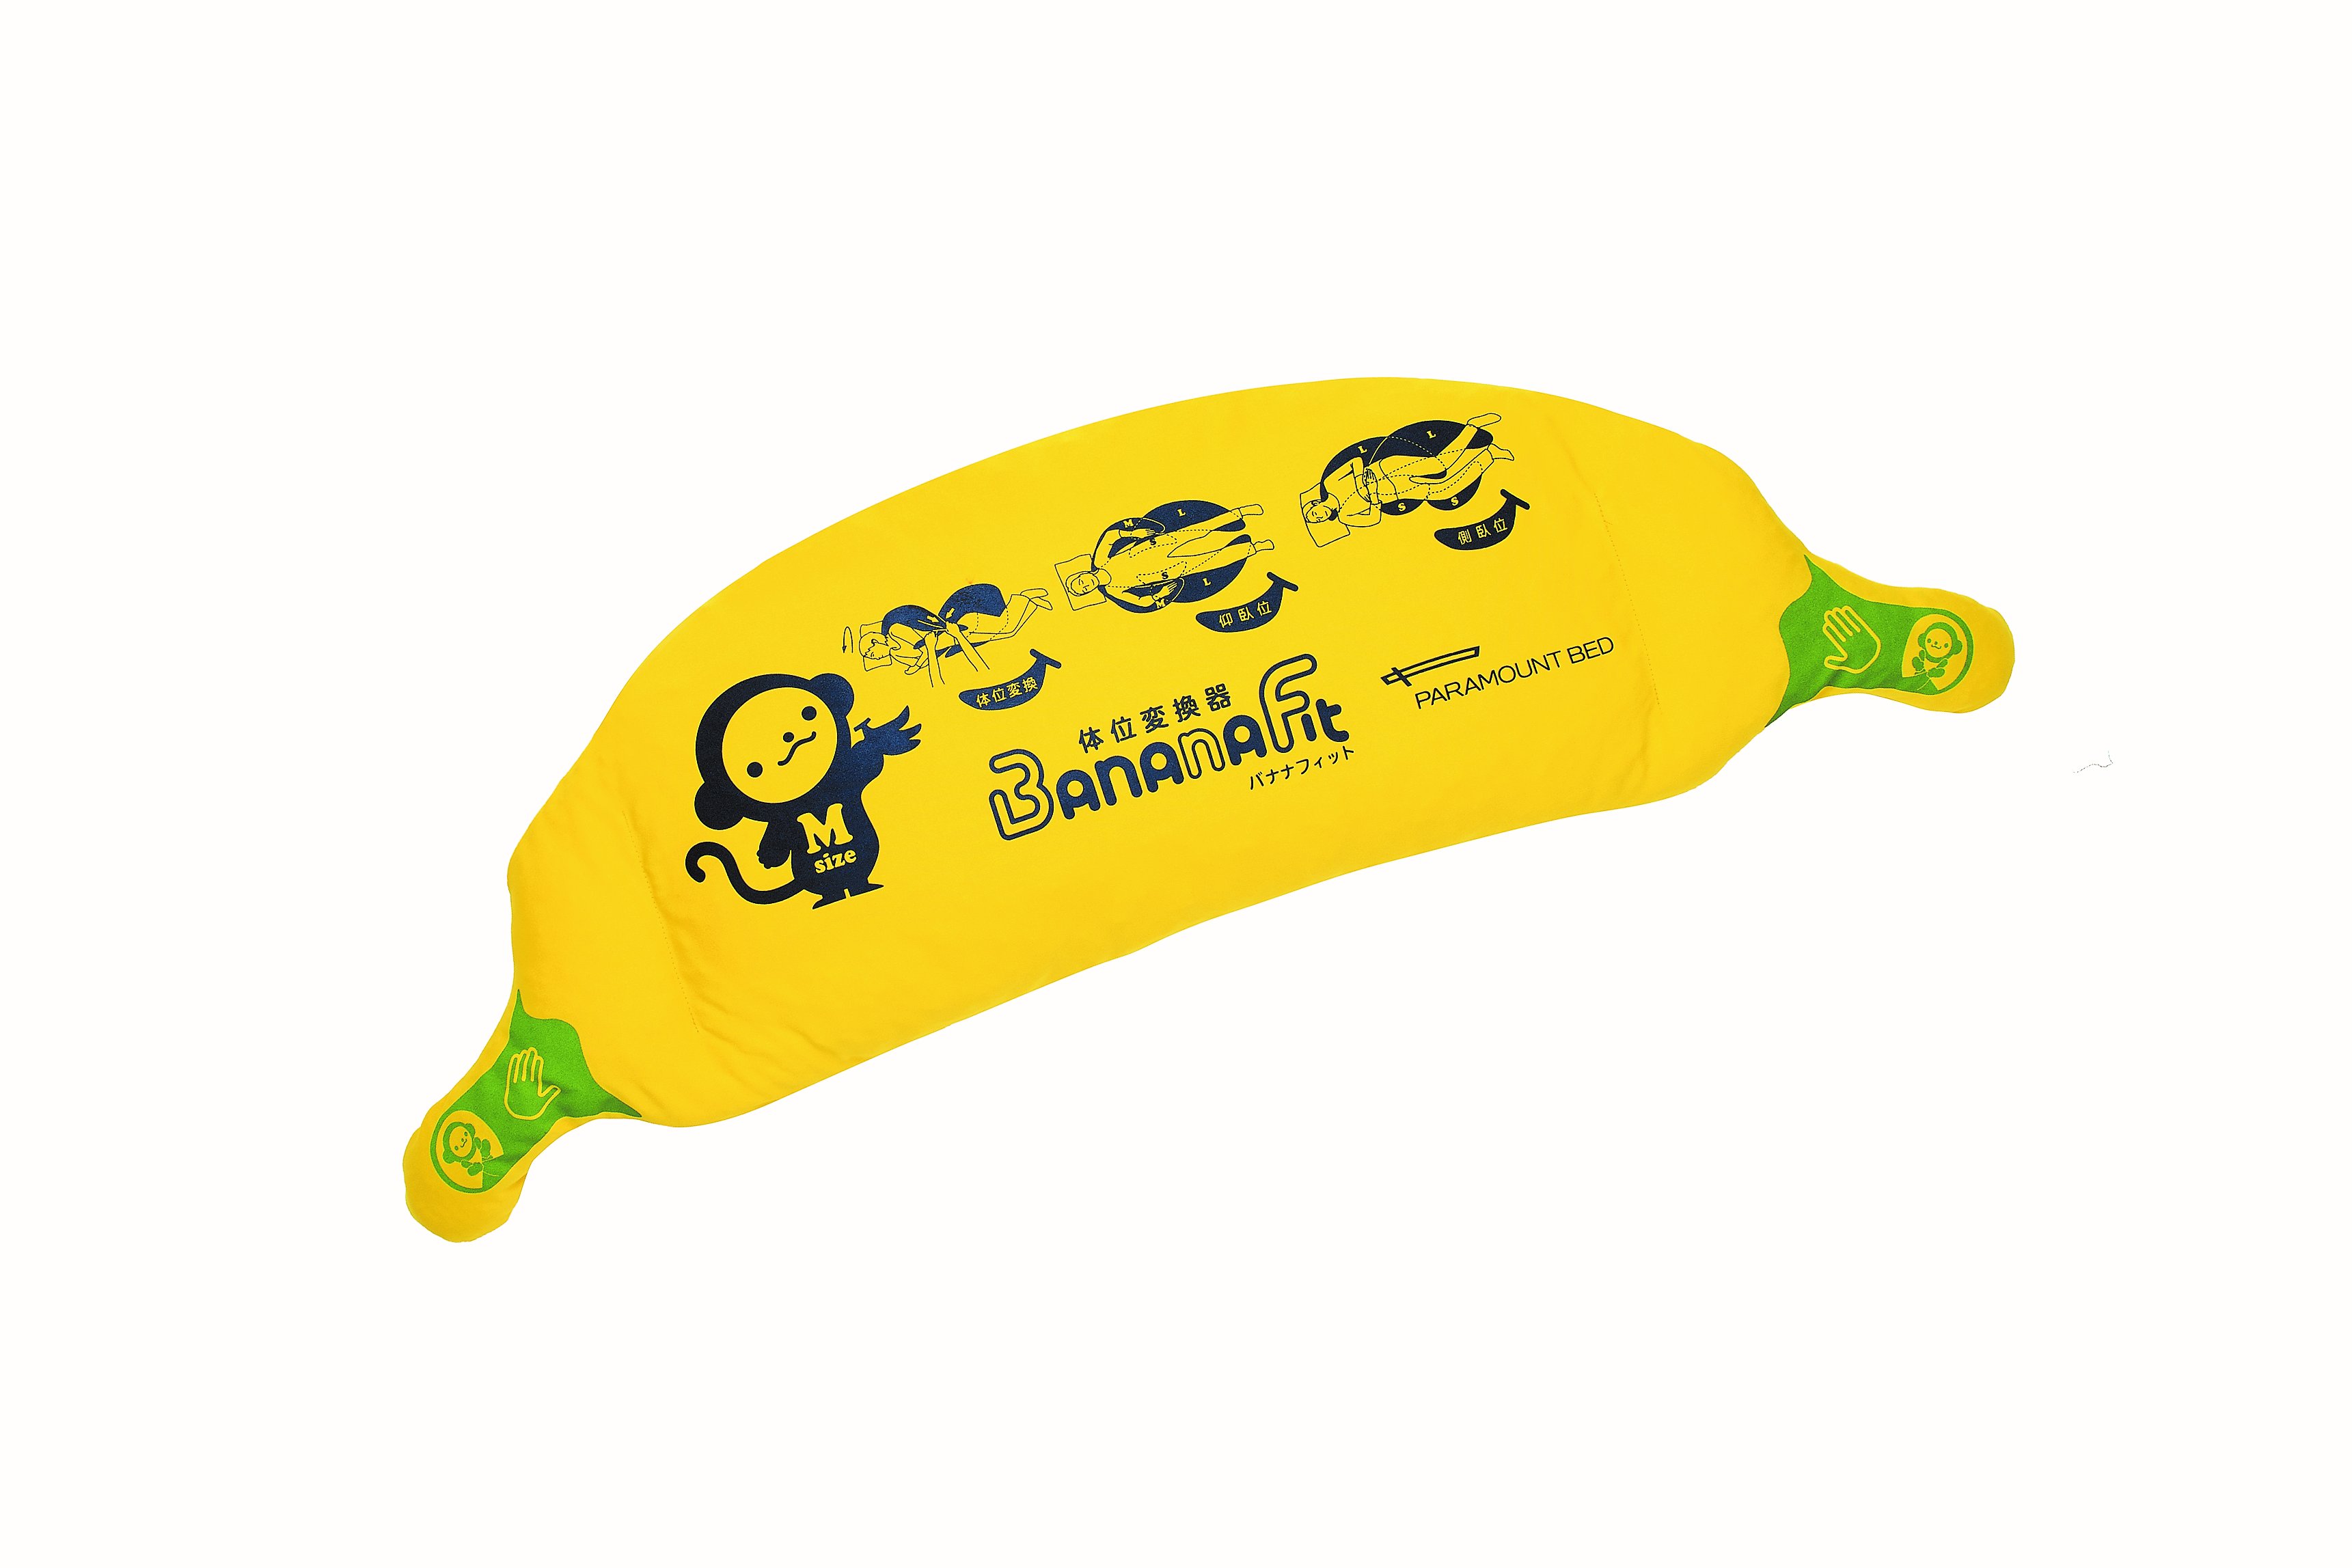 Pillow in yellow in the shape of a banana, with both ends compressed to form handles for grips. On the left of the pillow is the logo of a monkey with "M sizes" printed on it, followed by 3 samples of pictures showing how to position a person on the bed with this pillow. There are also the logo "Banana Fit" with its Japanese version of this word printed in the middle bottom of the pillow, with the company name "Paramount Bed" printed to its right.